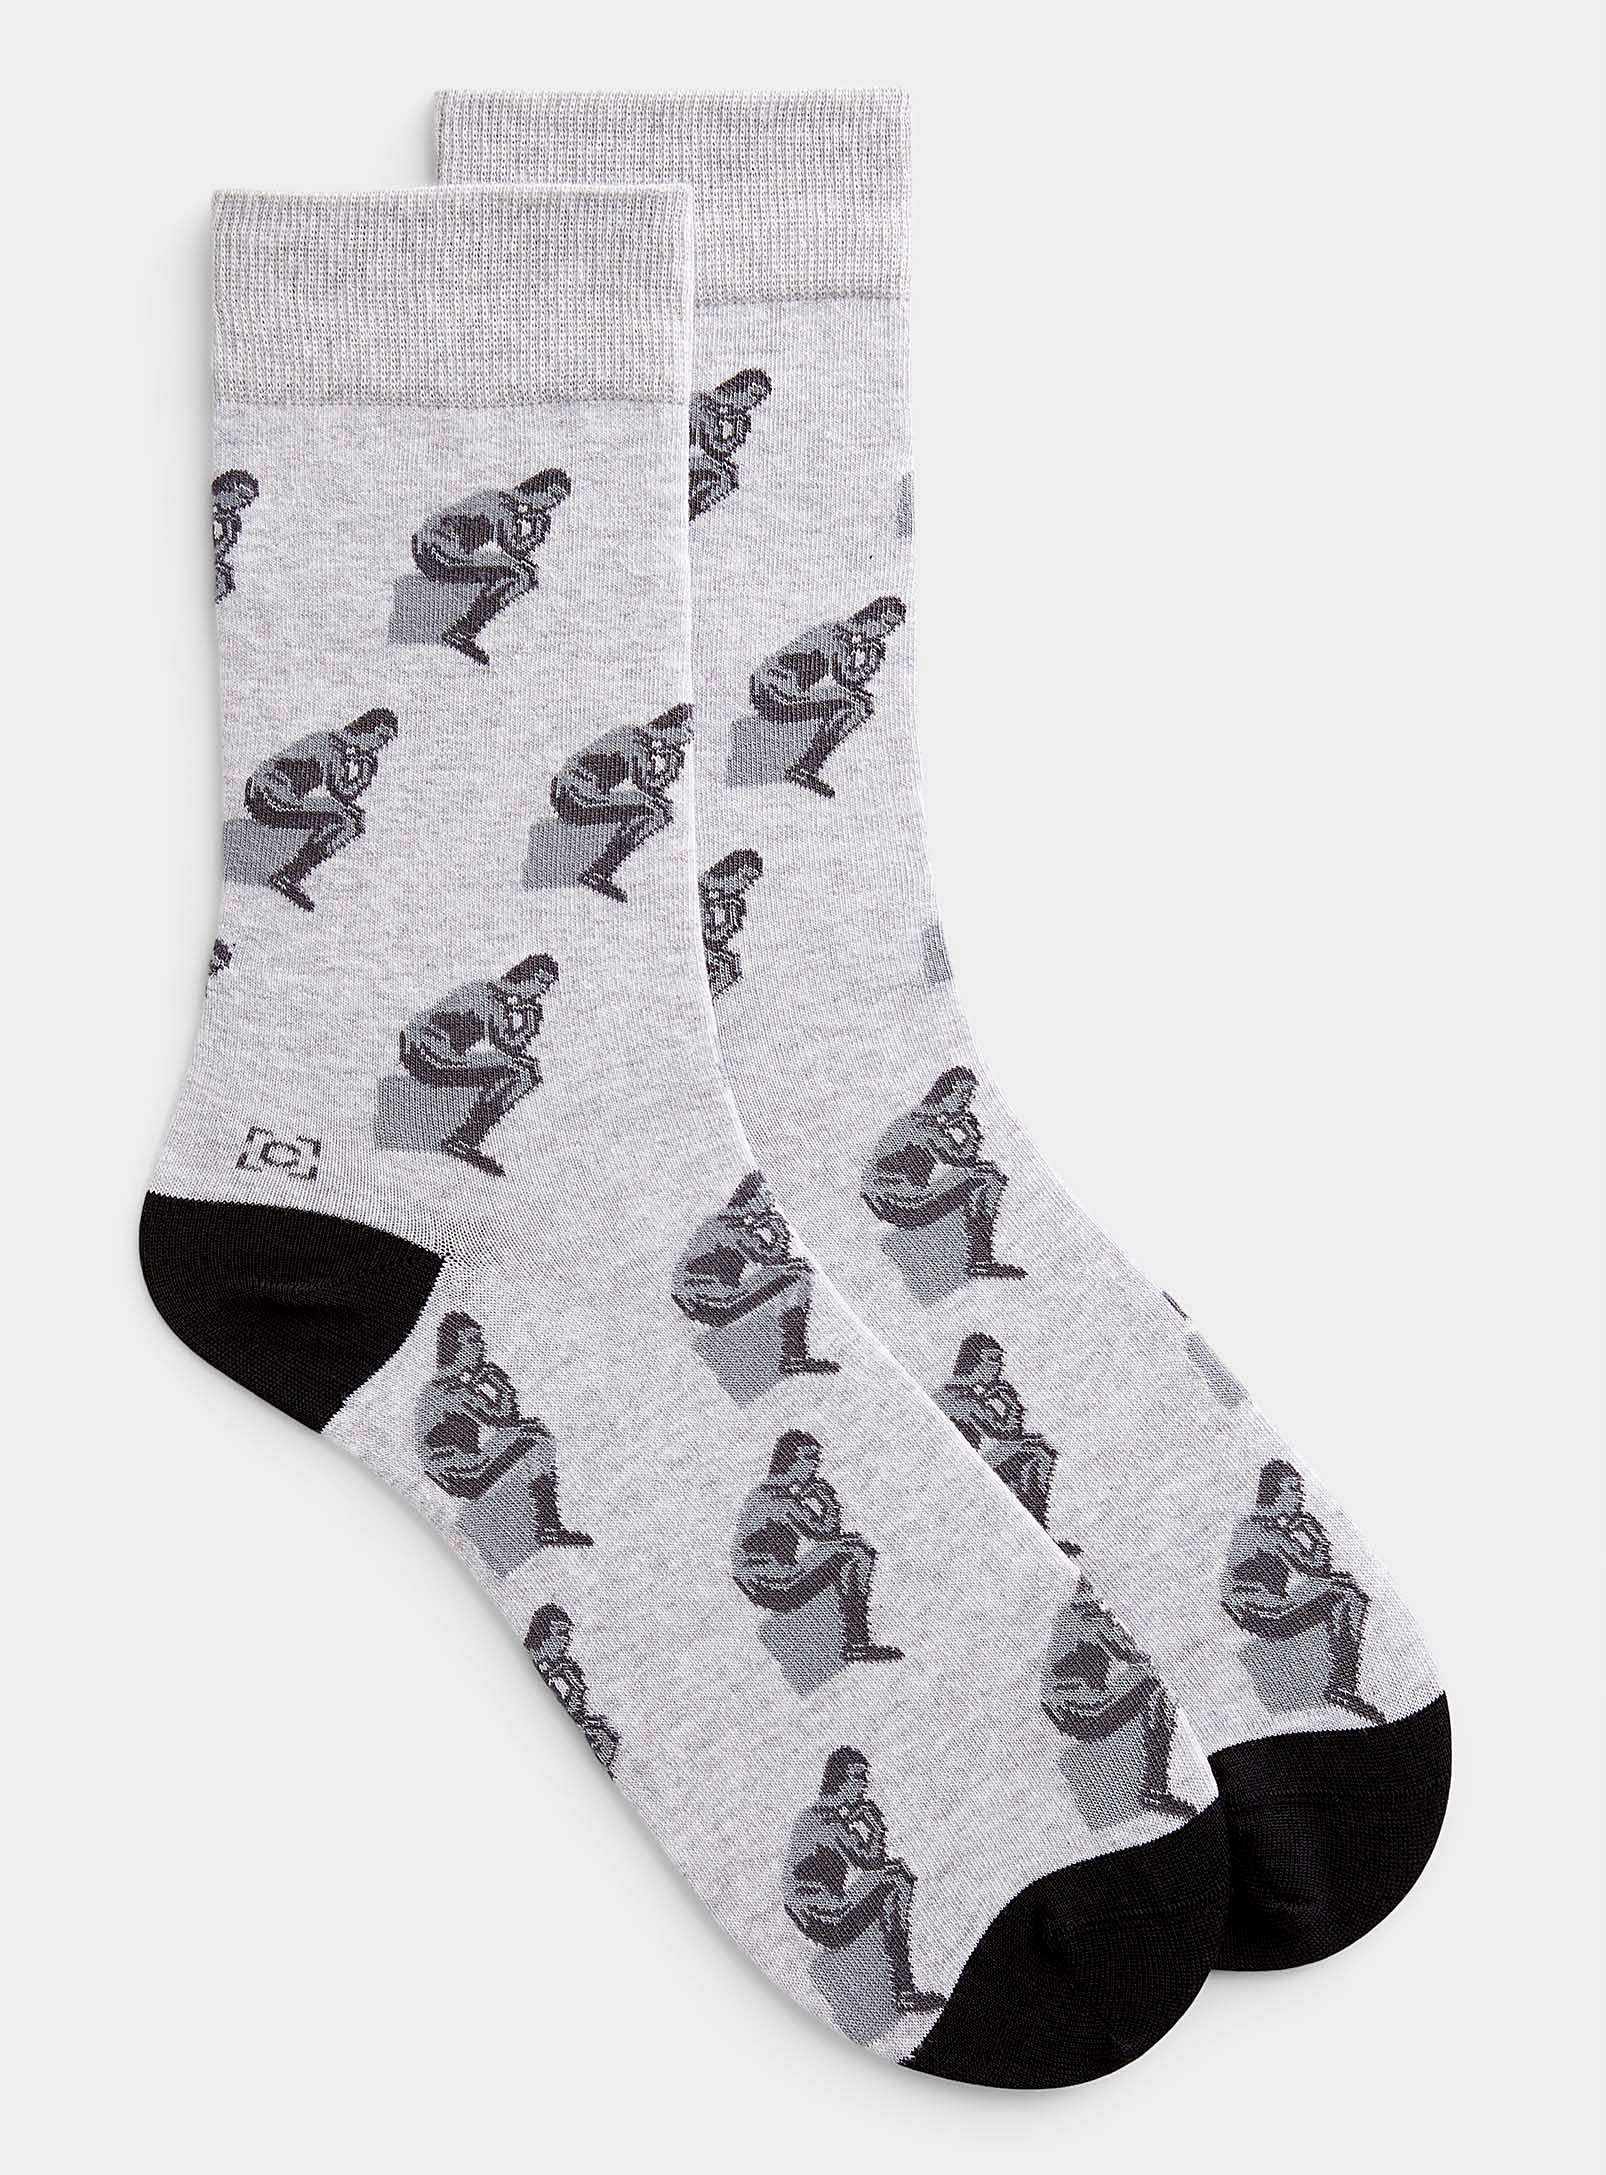 Sock Affairs The Thinker Sock In Patterned Black